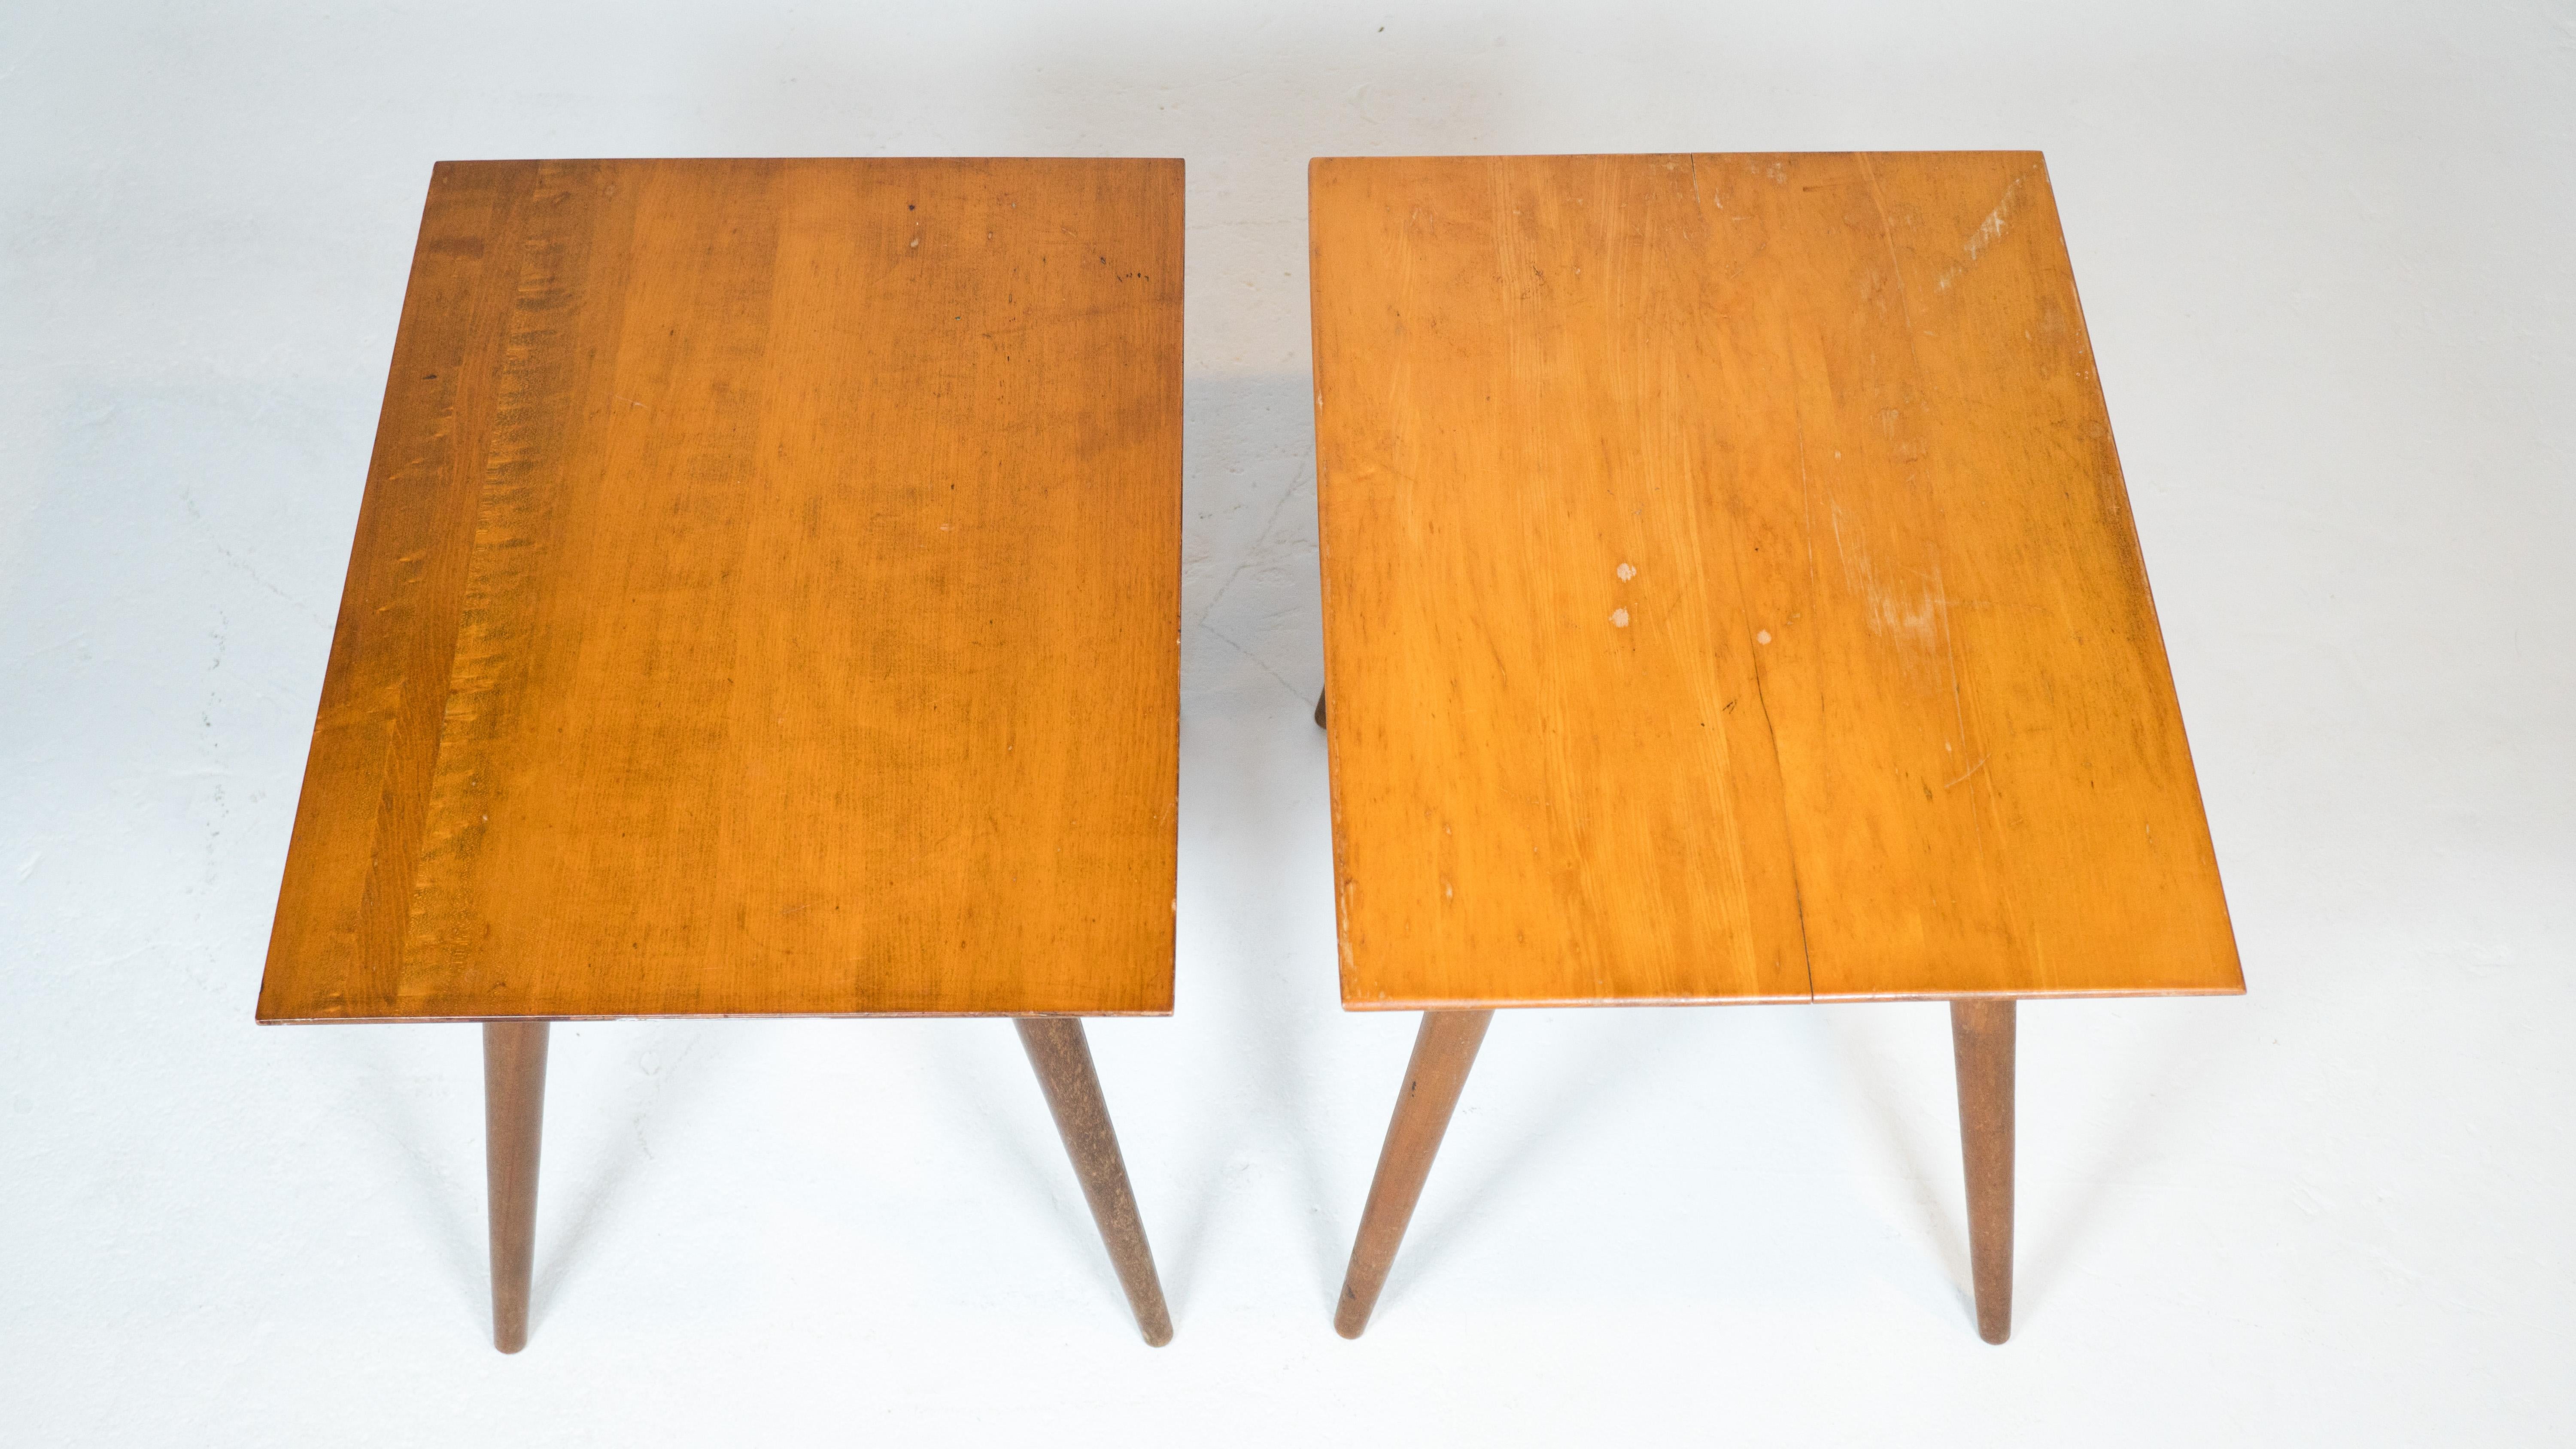 Maple 1960s Vintage Paul McCobb Planner Group Side Tables - a Pair For Sale